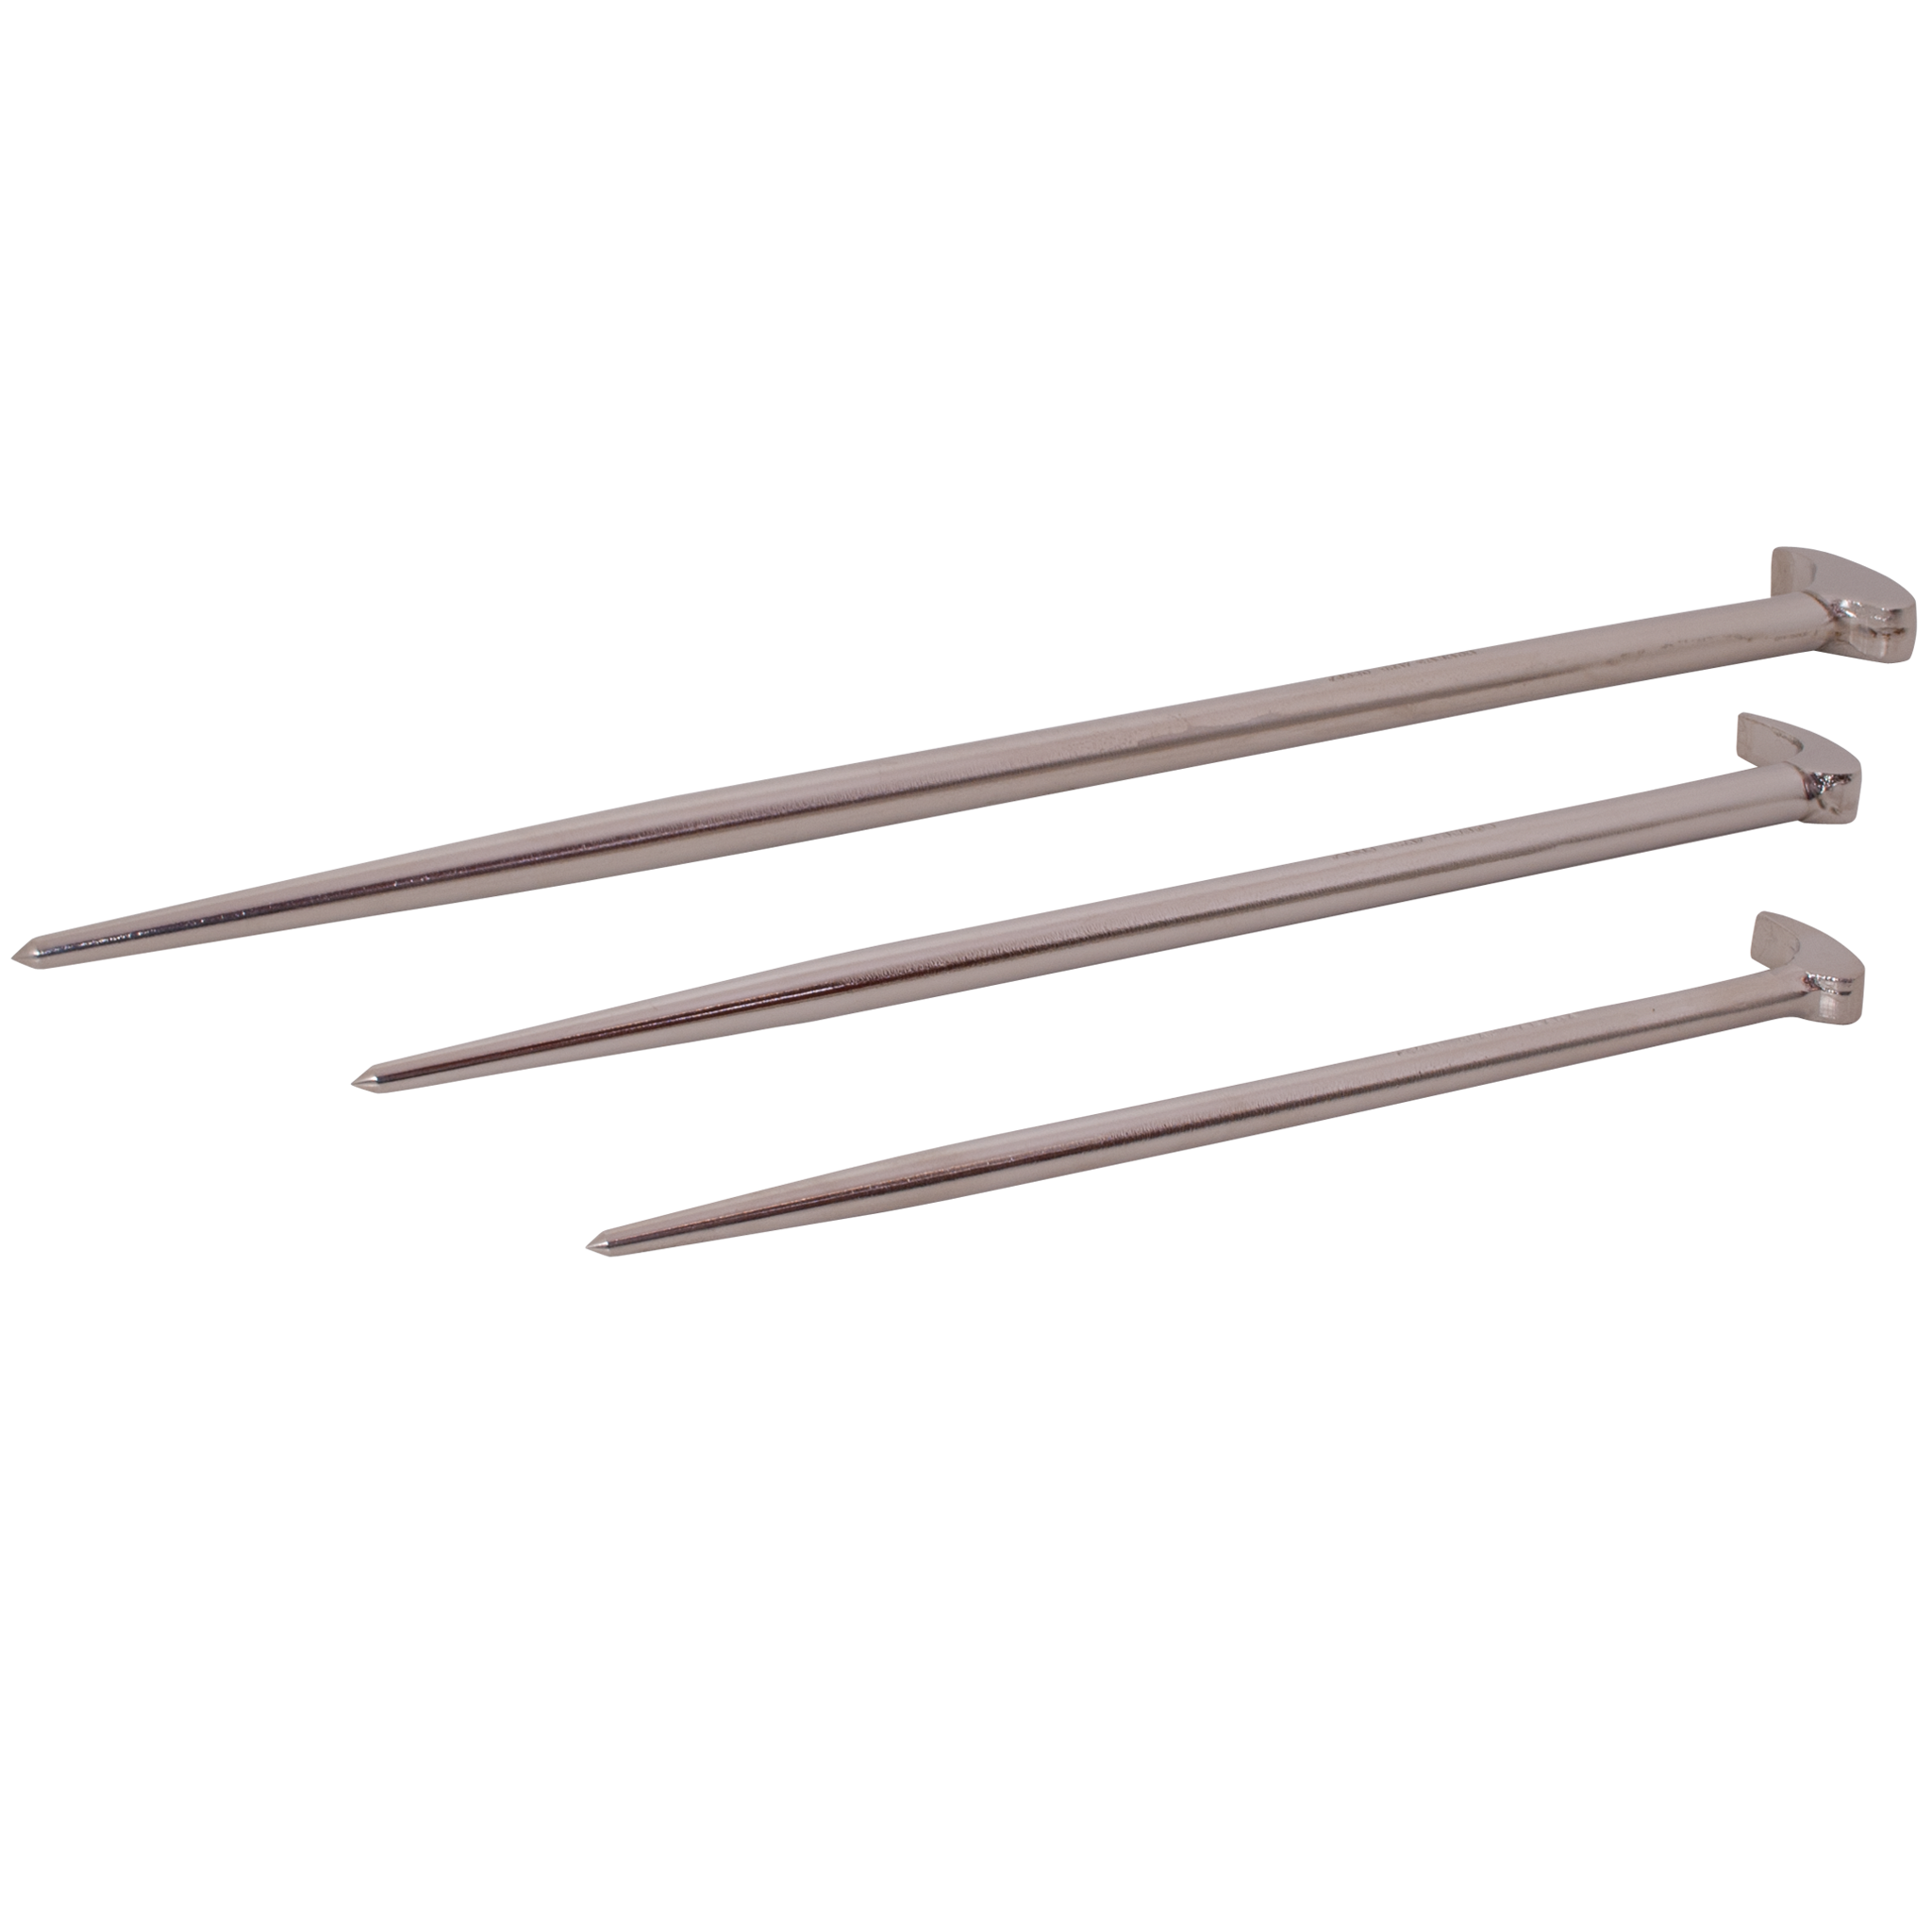 3 Piece Rolling Head Pry Bar Set Nickel Plated Finish